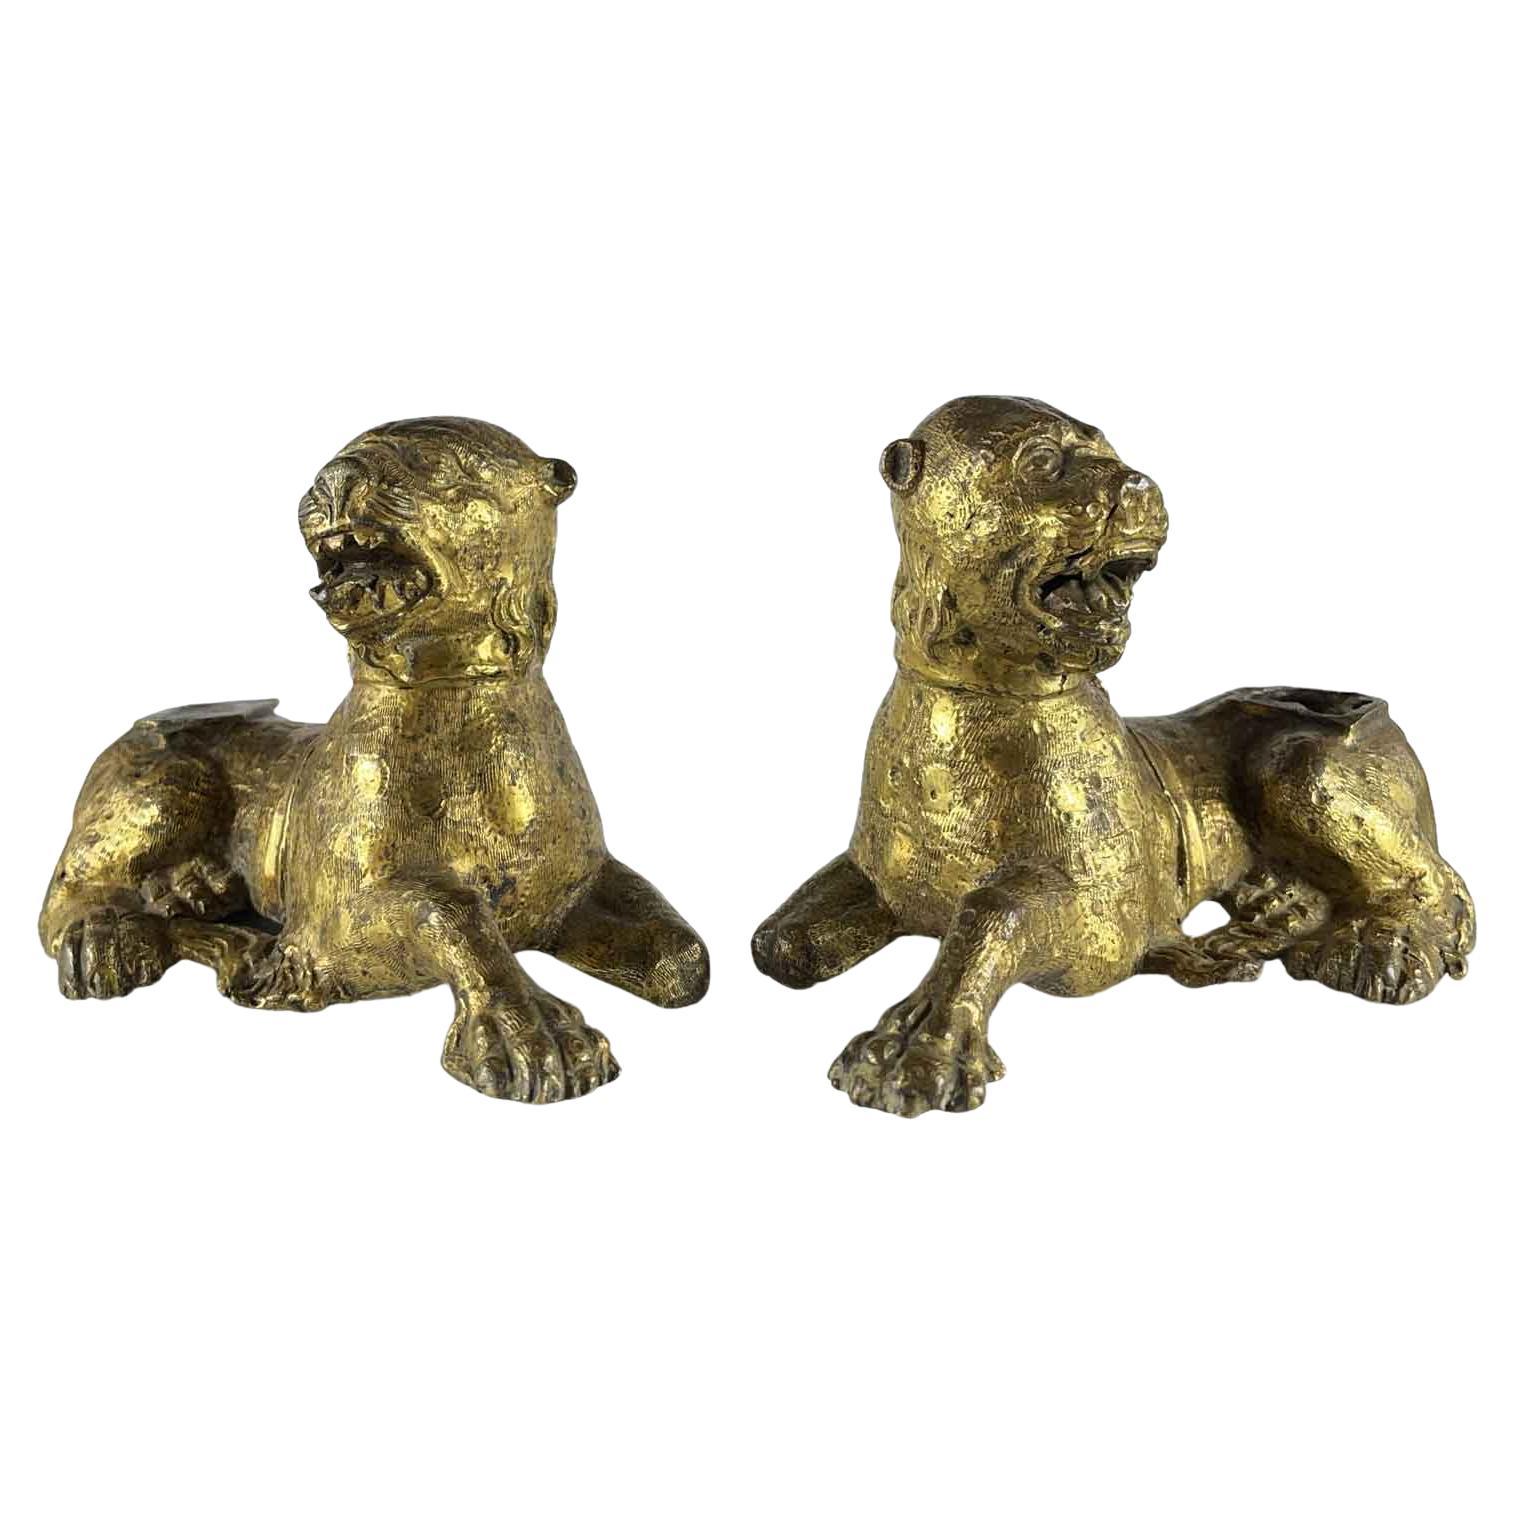 16th Century Pair of Gilt Lion Figures from Germany Nuremberg